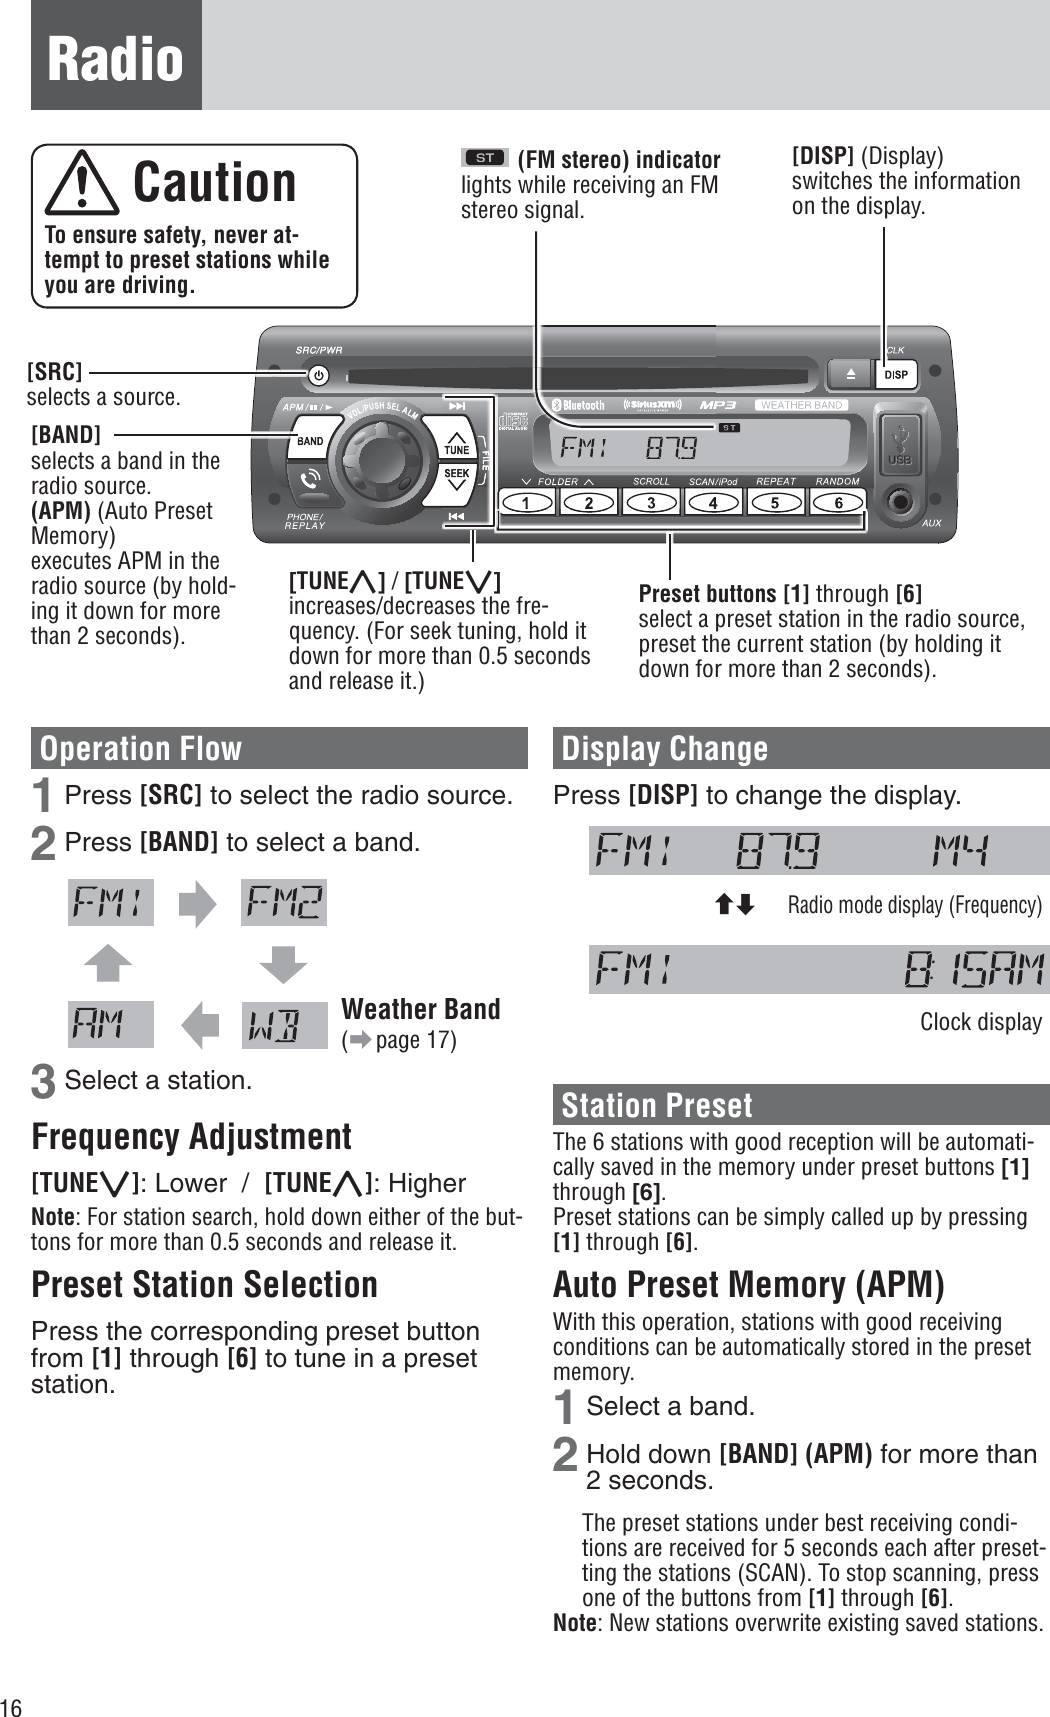 16Radio(FM stereo) indicatorlights while receiving an FM stereo signal.Operation Flow 1 Press [SRC] to select the radio source. 2 Press [BAND] to select a band.Weather Band(a page 17)3 Select a station. Frequency Adjustment [TUNE{]: Lower  / [TUNE}]: Higher Note: For station search, hold down either of the but-tons for more than 0.5 seconds and release it.Preset Station Selection Press the corresponding preset button from [1] through [6] to tune in a preset station.Display Change Press [DISP] to change the display. Radio mode display (Frequency) Clock display Station Preset The 6 stations with good reception will be automati-cally saved in the memory under preset buttons [1]through [6].Preset stations can be simply called up by pressing [1] through [6].Auto Preset Memory (APM) With this operation, stations with good receiving conditions can be automatically stored in the preset memory. 1 Select a band. 2 Hold down [BAND] (APM) for more than 2 seconds. The preset stations under best receiving condi-tions are received for 5 seconds each after preset-ting the stations (SCAN). To stop scanning, press one of the buttons from [1] through [6].Note: New stations overwrite existing saved stations.  Caution To ensure safety, never at-tempt to preset stations while you are driving.[SRC]selects a source. [DISP] (Display) switches the information on the display. [BAND]selects a band in the radio source. (APM) (Auto Preset Memory) executes APM in the radio source (by hold-ing it down for more than 2 seconds).[TUNE}] / [TUNE{]increases/decreases the fre-quency. (For seek tuning, hold it down for more than 0.5 seconds and release it.)Preset buttons [1] through [6]select a preset station in the radio source, preset the current station (by holding it down for more than 2 seconds).cd